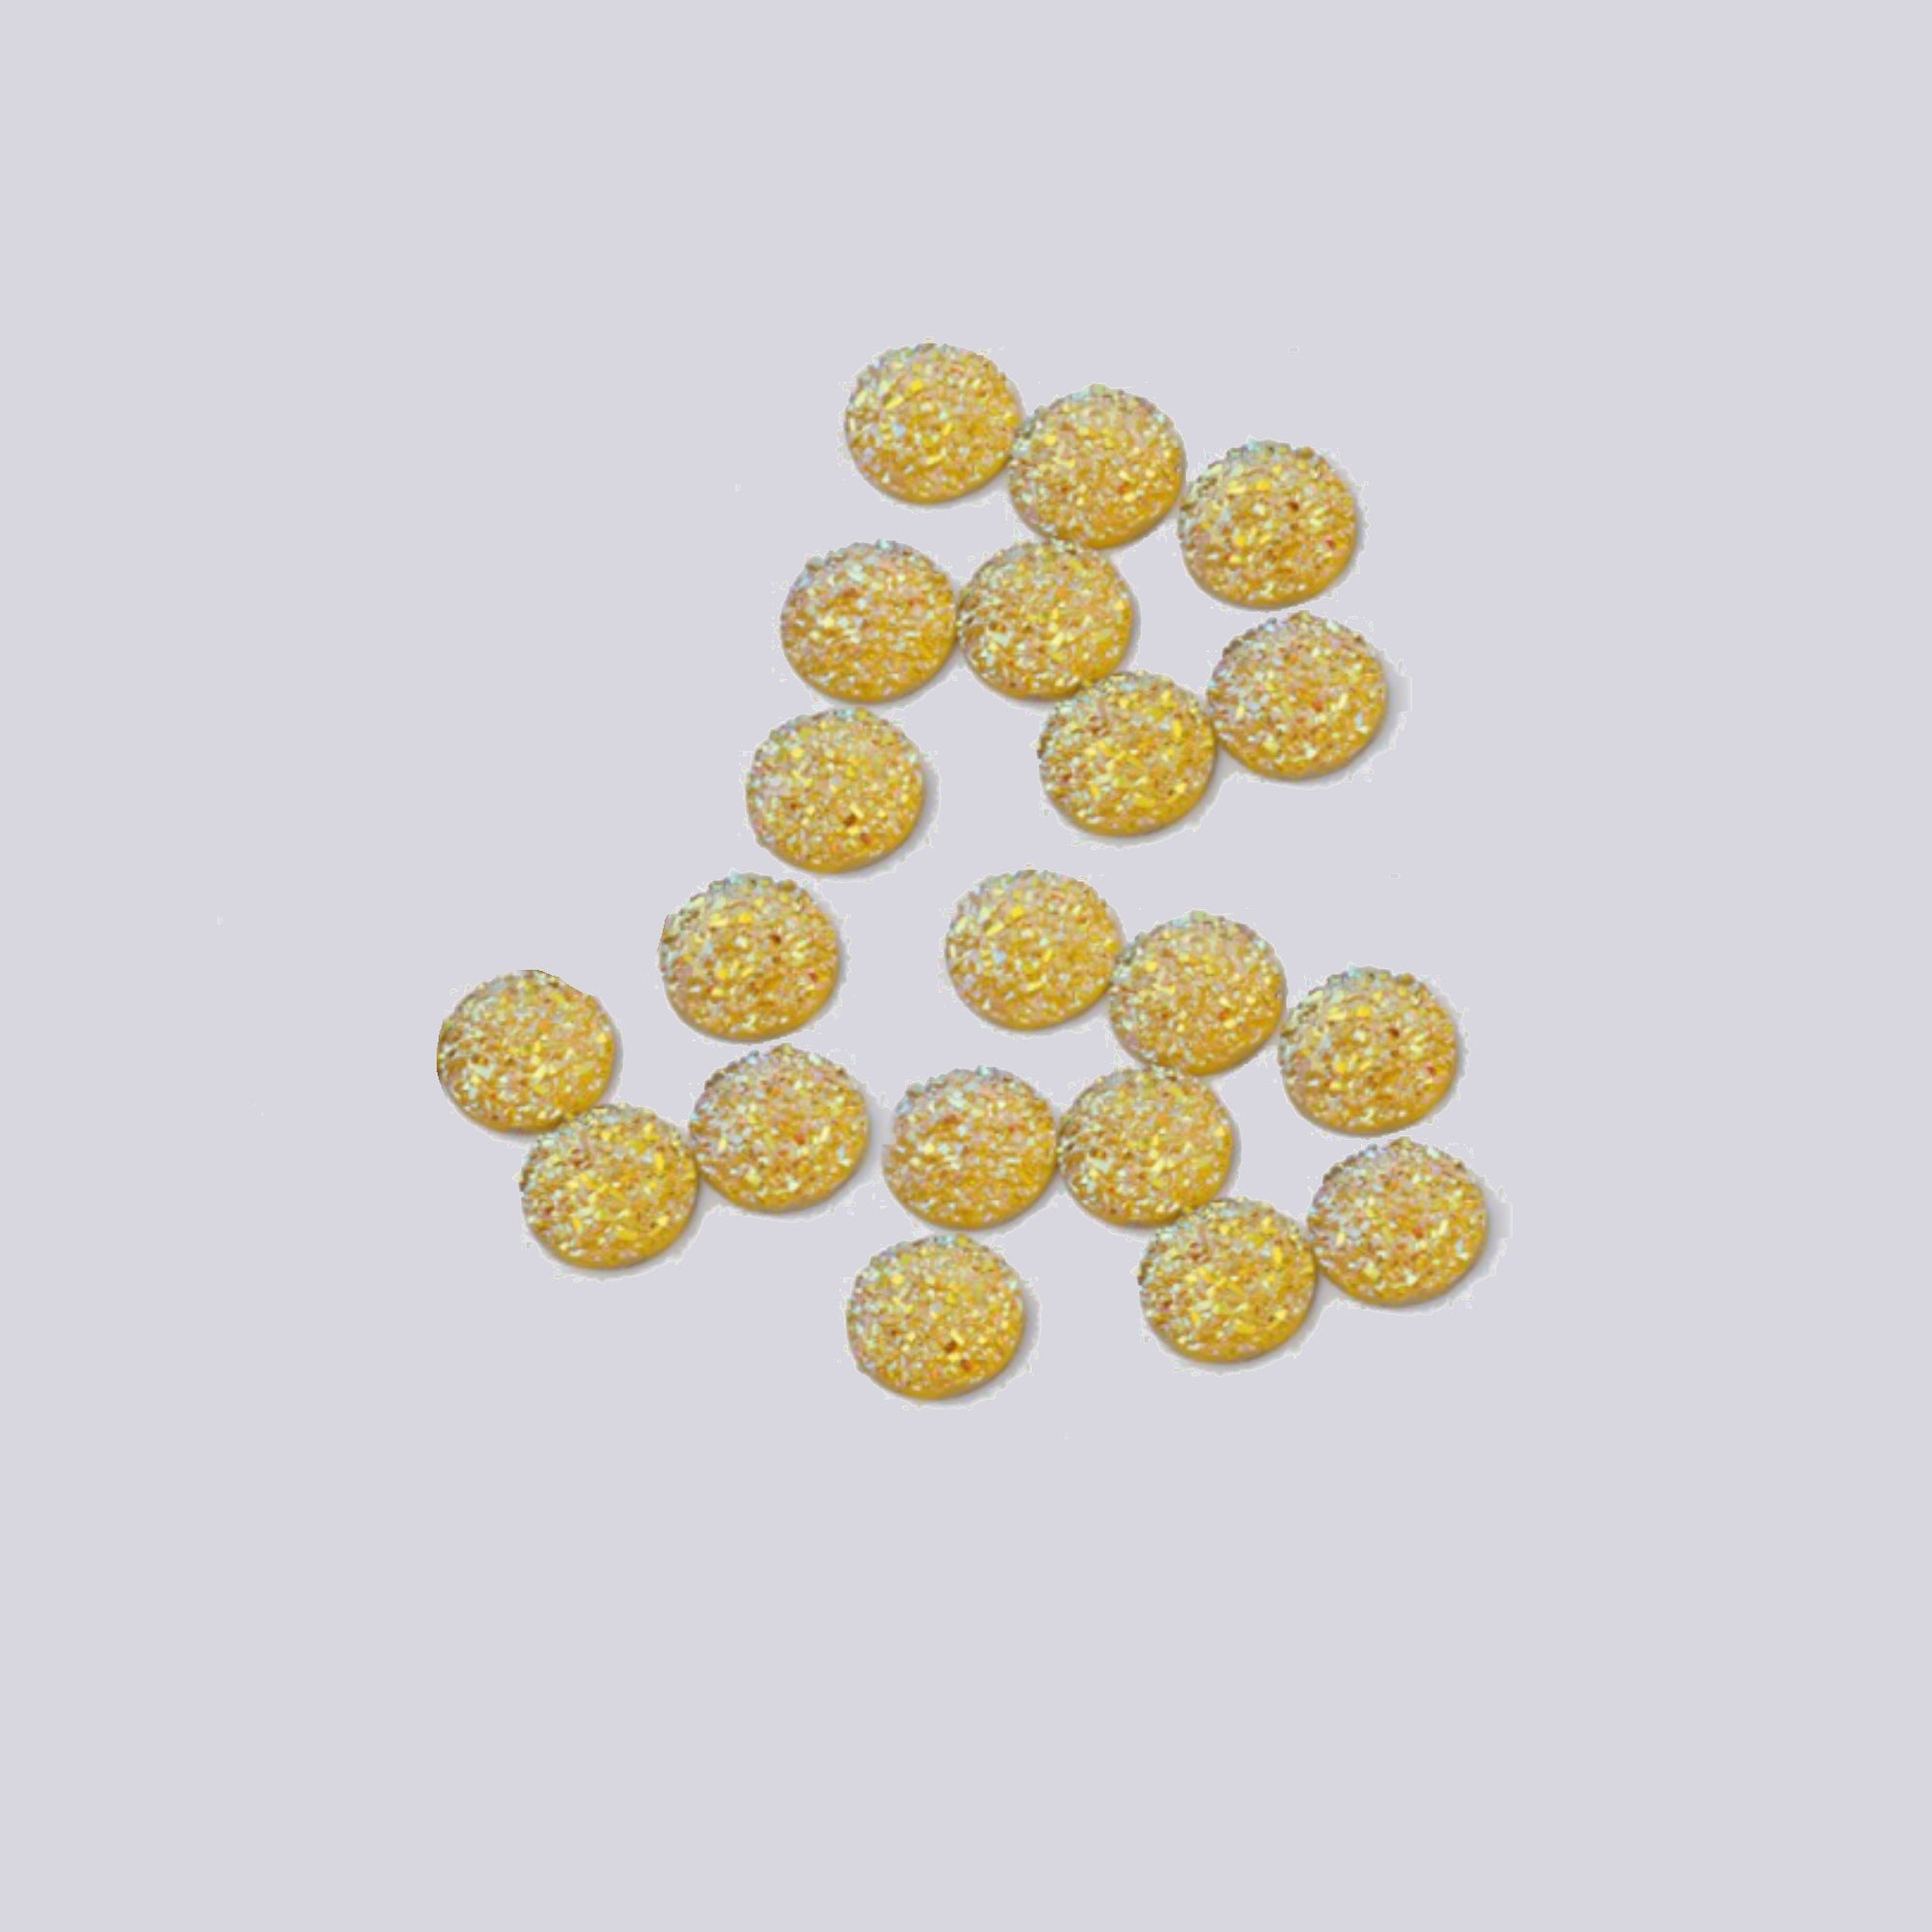 Bling It Up Collection 3/8" Yellow Chunky Round Bling - Pkg. of 20